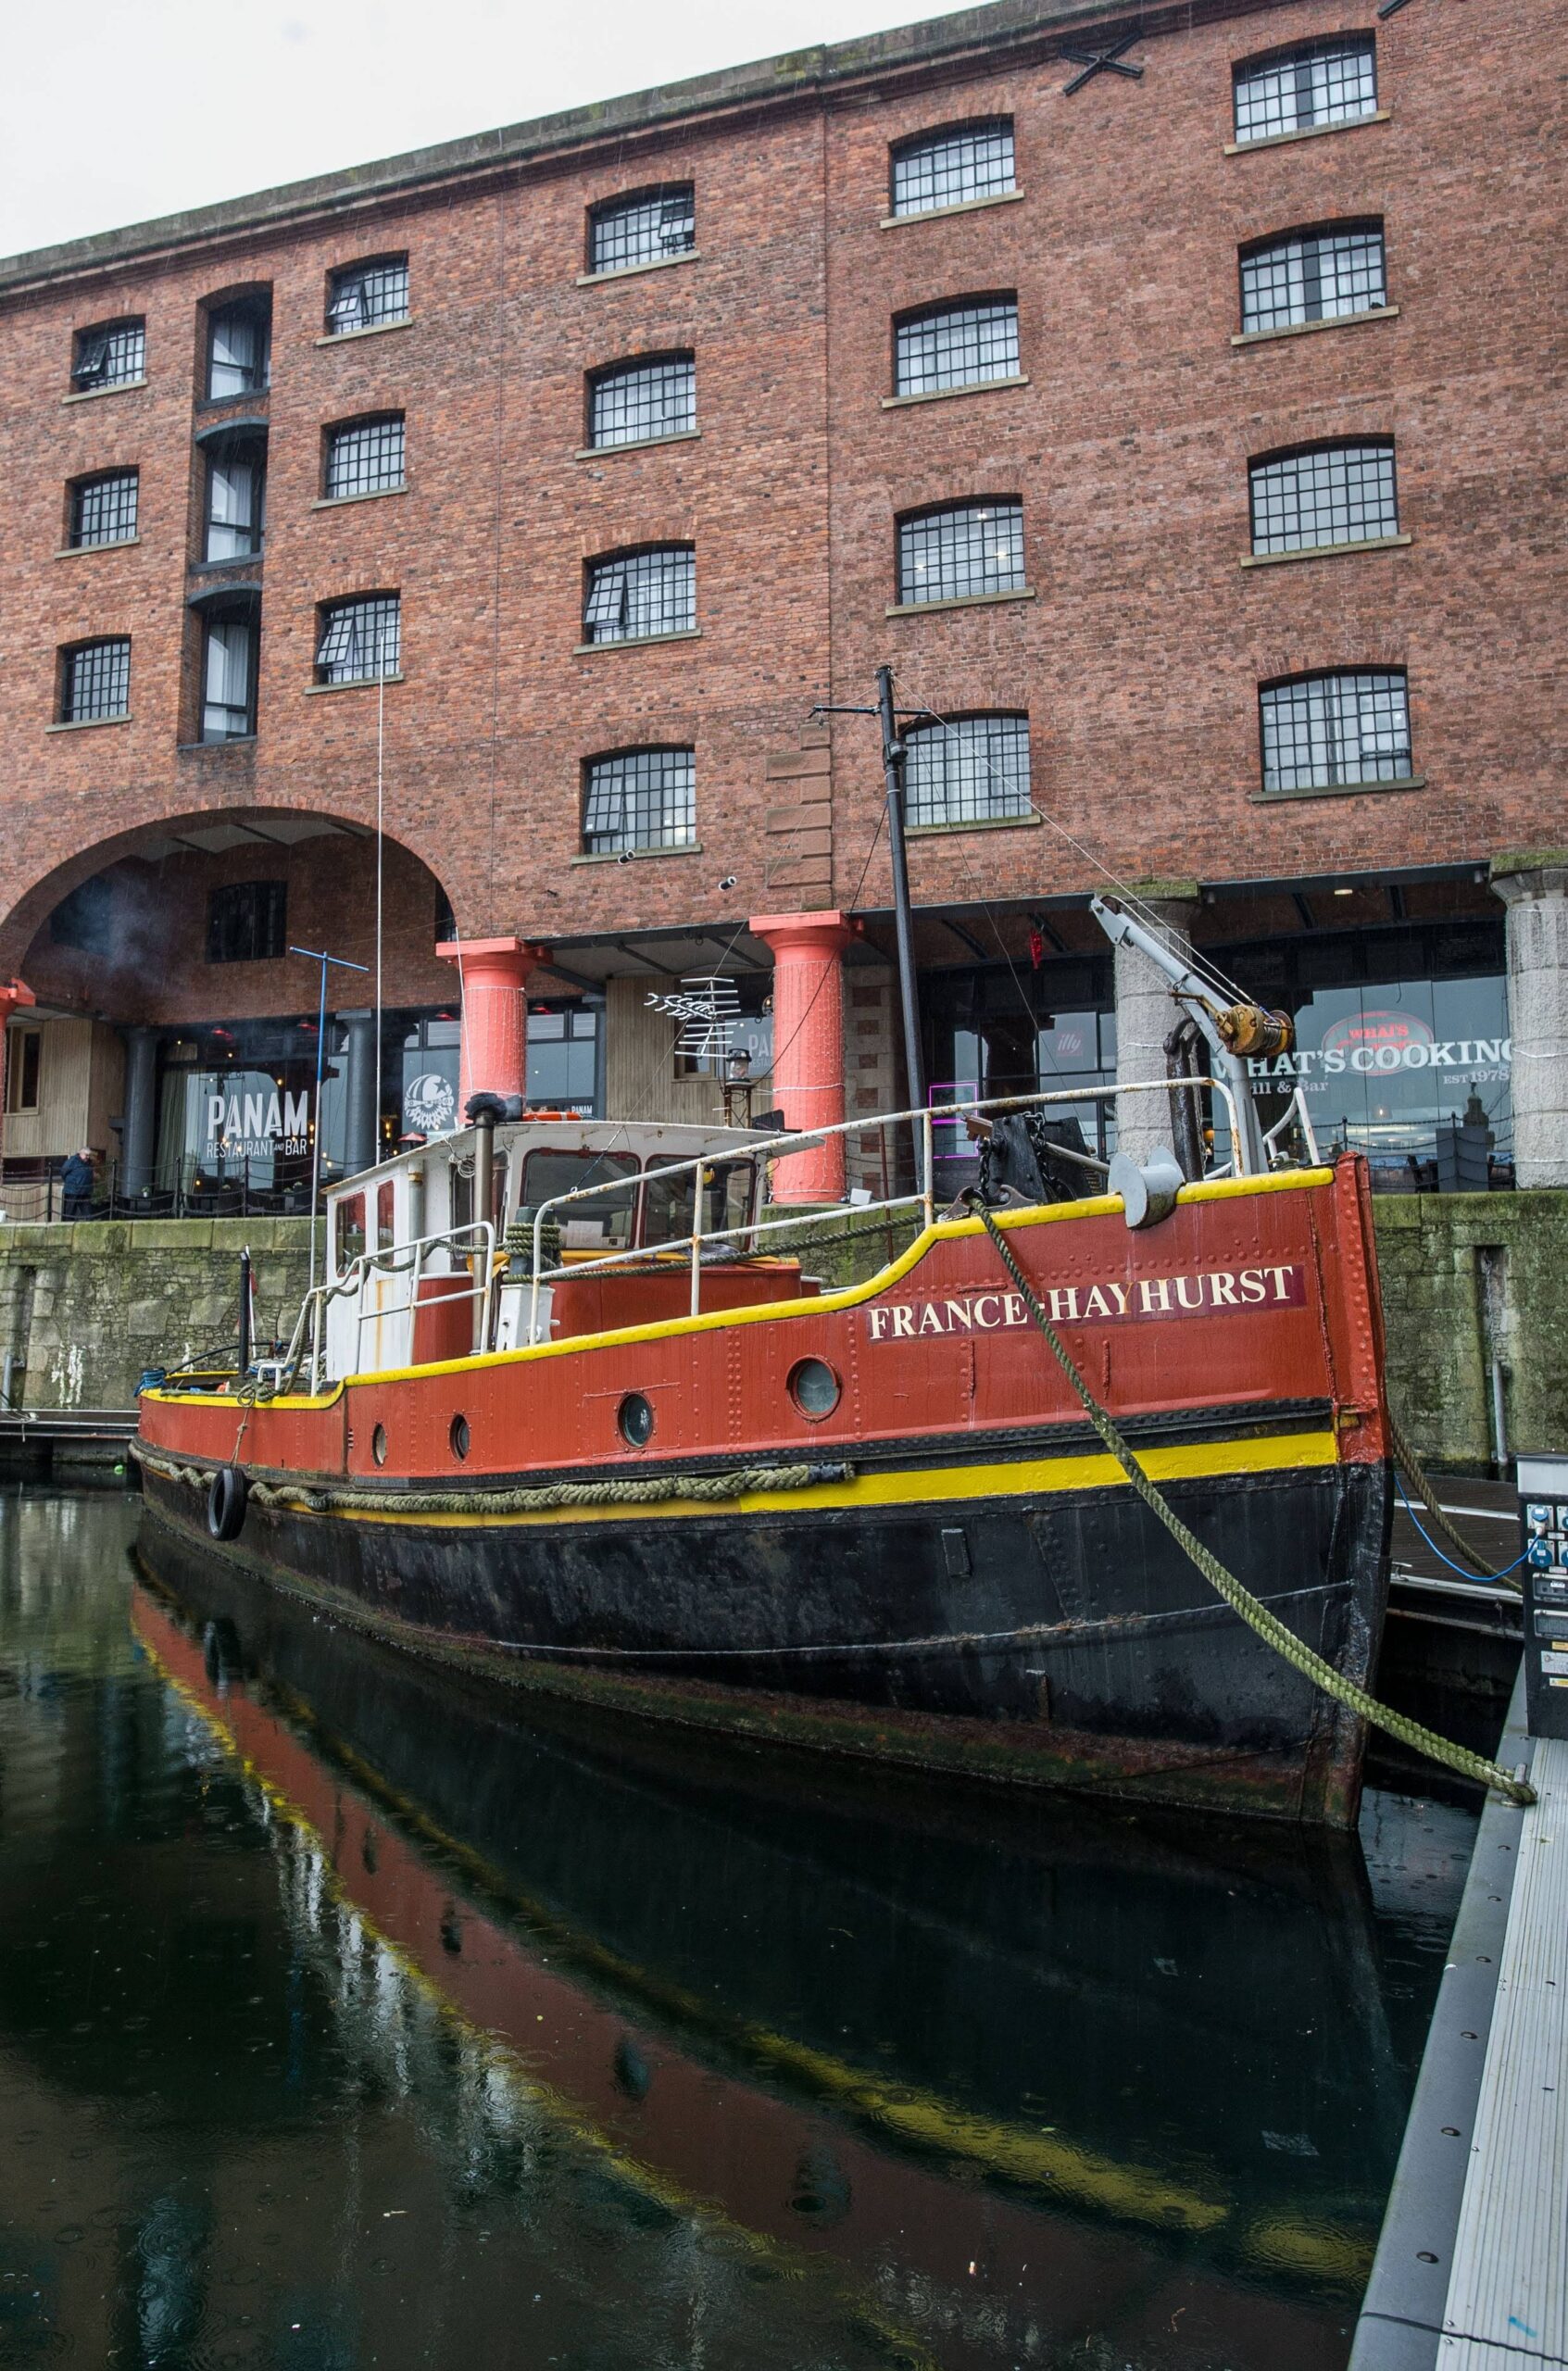 Exterior of the France-Hayhurst docked at the Royal Albert Dock, Liverpool. Photo by James Maloney